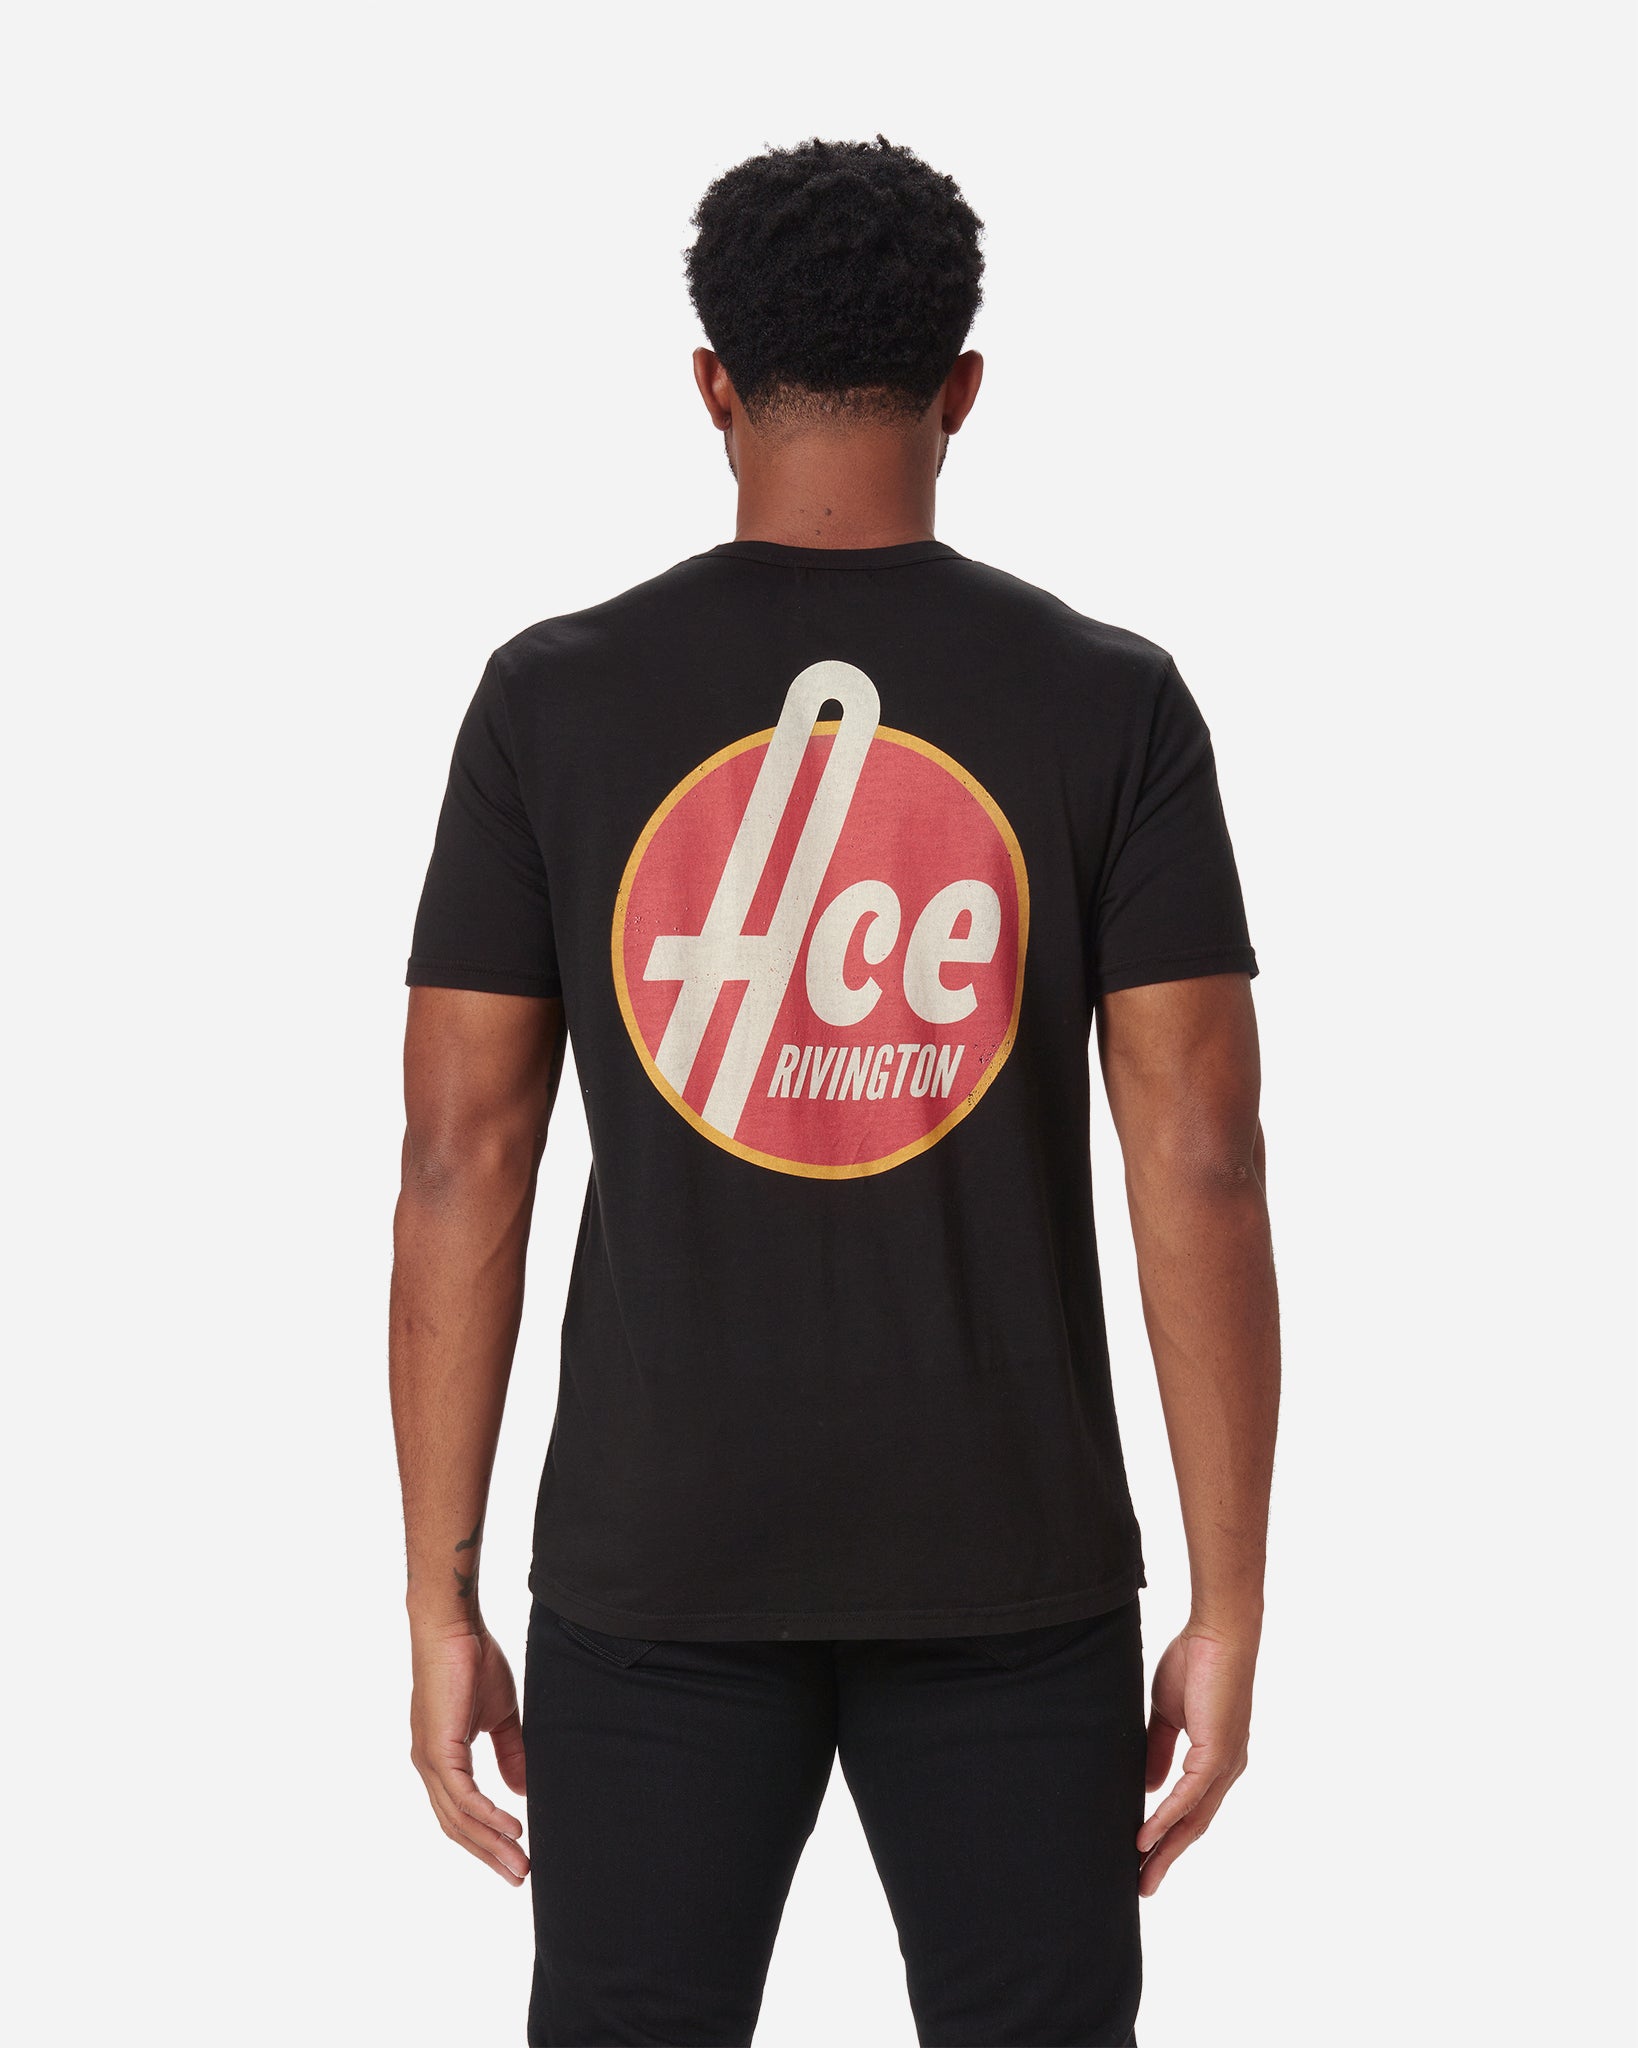 back of model wearing men's black graphic tee shirt parodying 1950's style aesthetic reading "Ace Rivington" in bold off-white text encircled by a red fill and gold rim